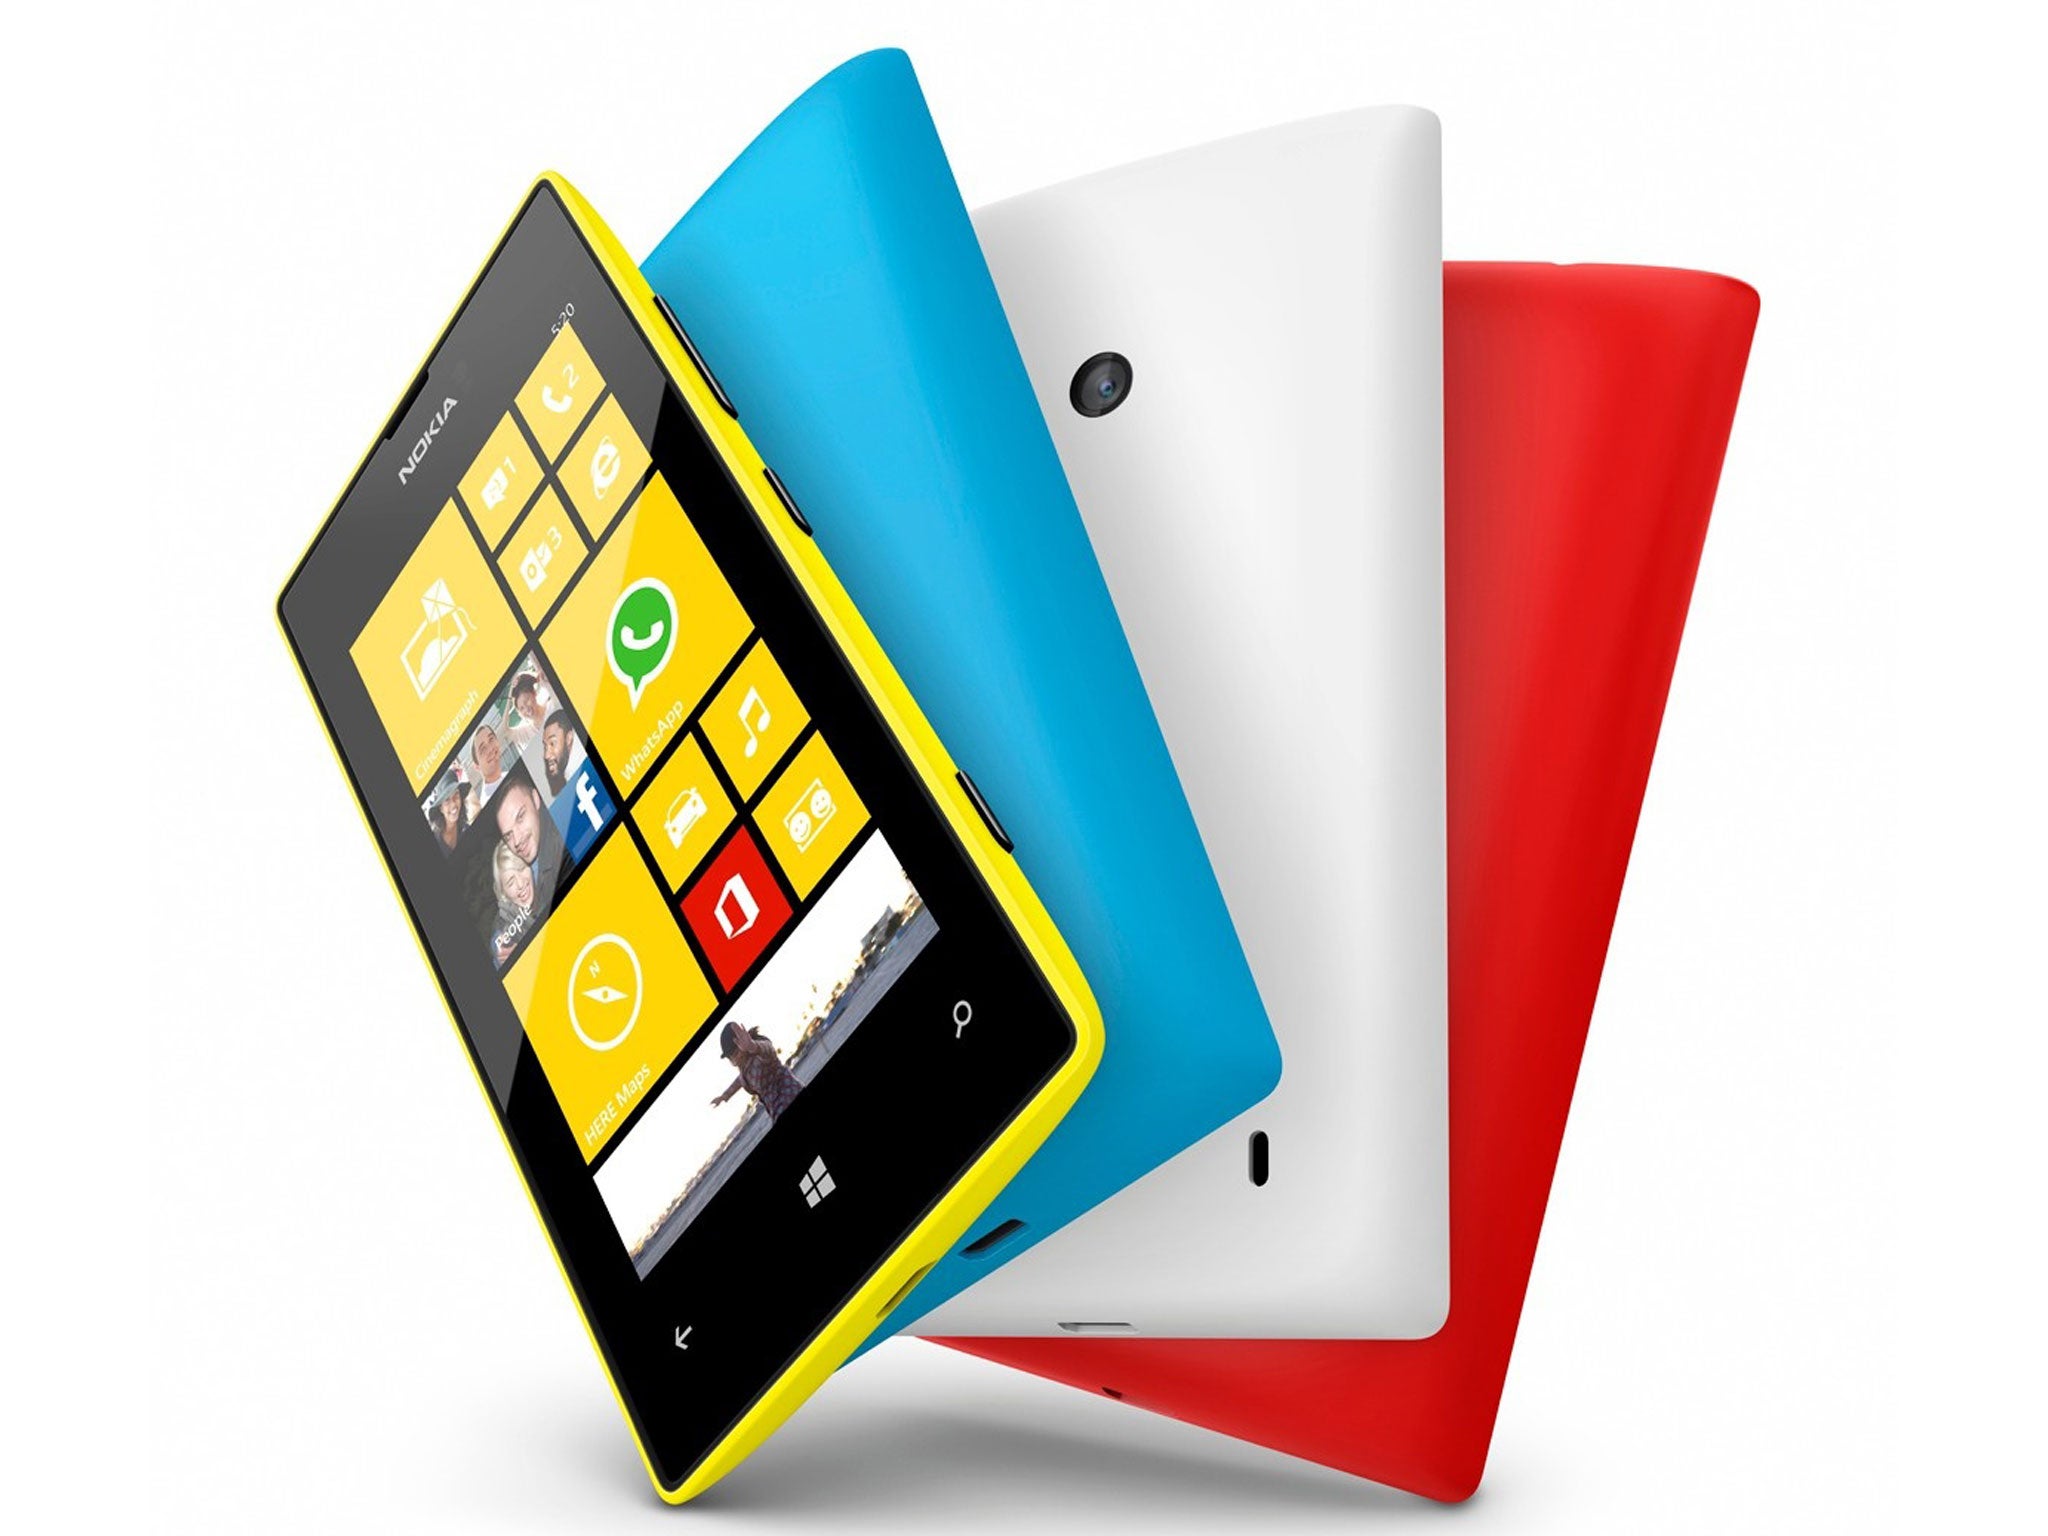 The Nokia Lumia 520 is on offer with an Xbox in a January sale